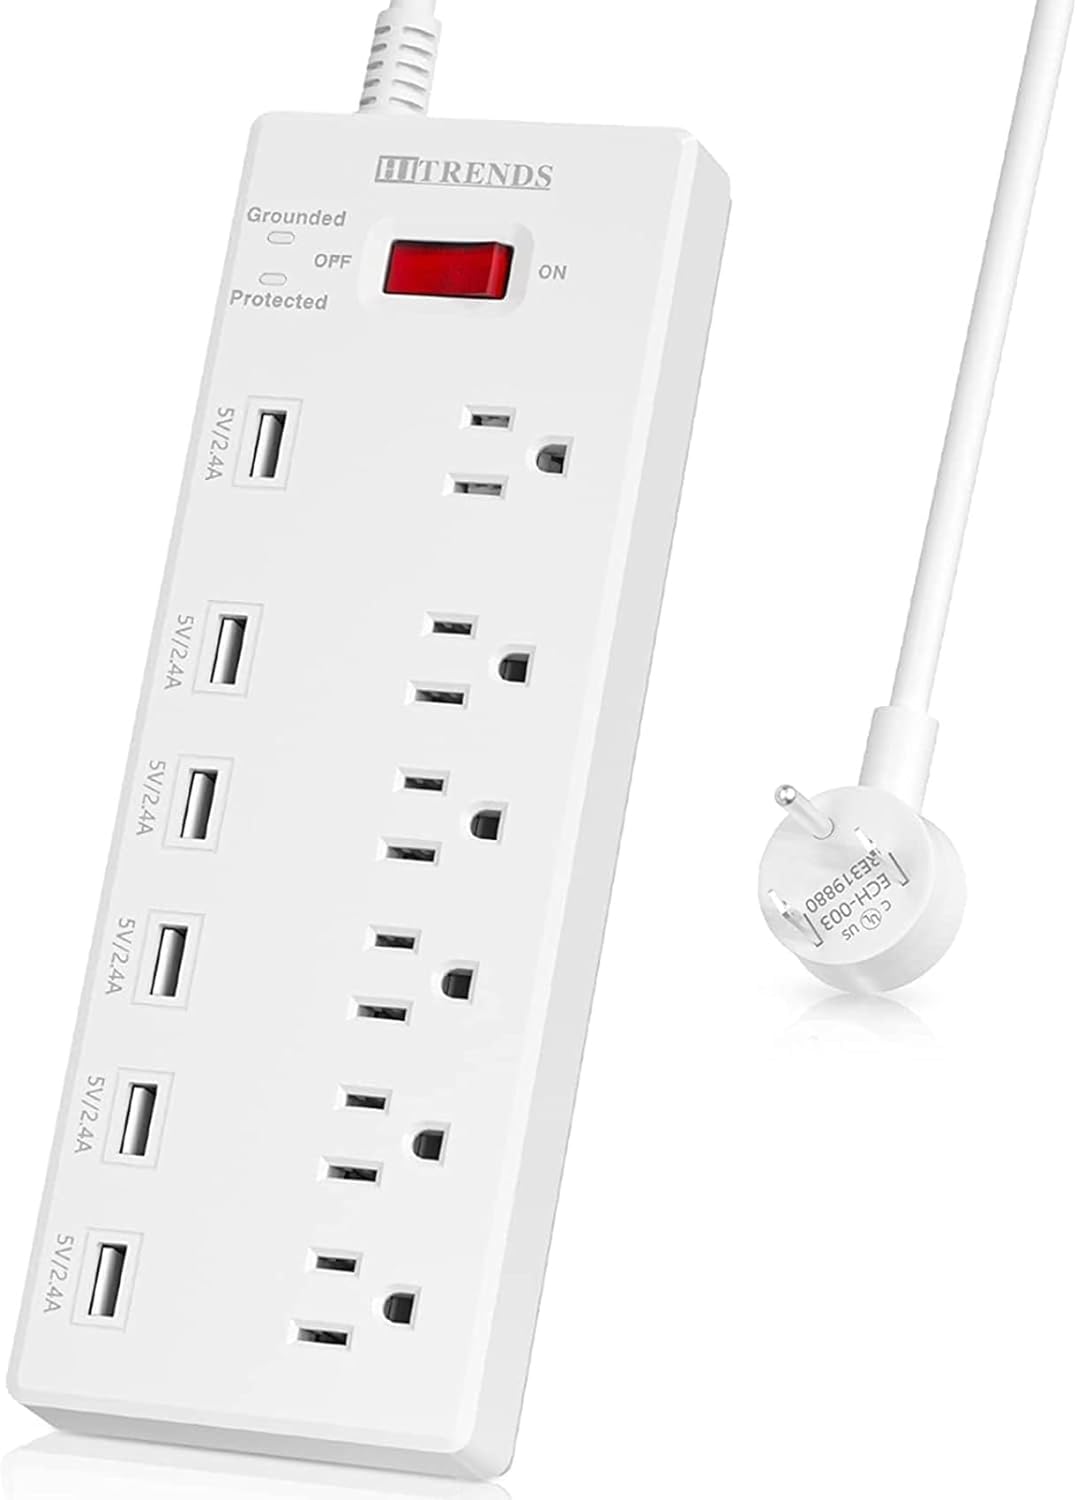 I looked at every single power strip on Amazon 2-3 times before buying this(the Amazon person giggles cuz they can probably see thats true if they wanted to). I love the combo with usb! Its very cool! Less adapters. I like the shorter size from what I was using. I have several things I use it for that I am able to put in a cut off box with a cut out at one end to hold this and that. I found that Amz has boxes you can buy to put them in and protect kids, pets, etc! I looked at those for days as